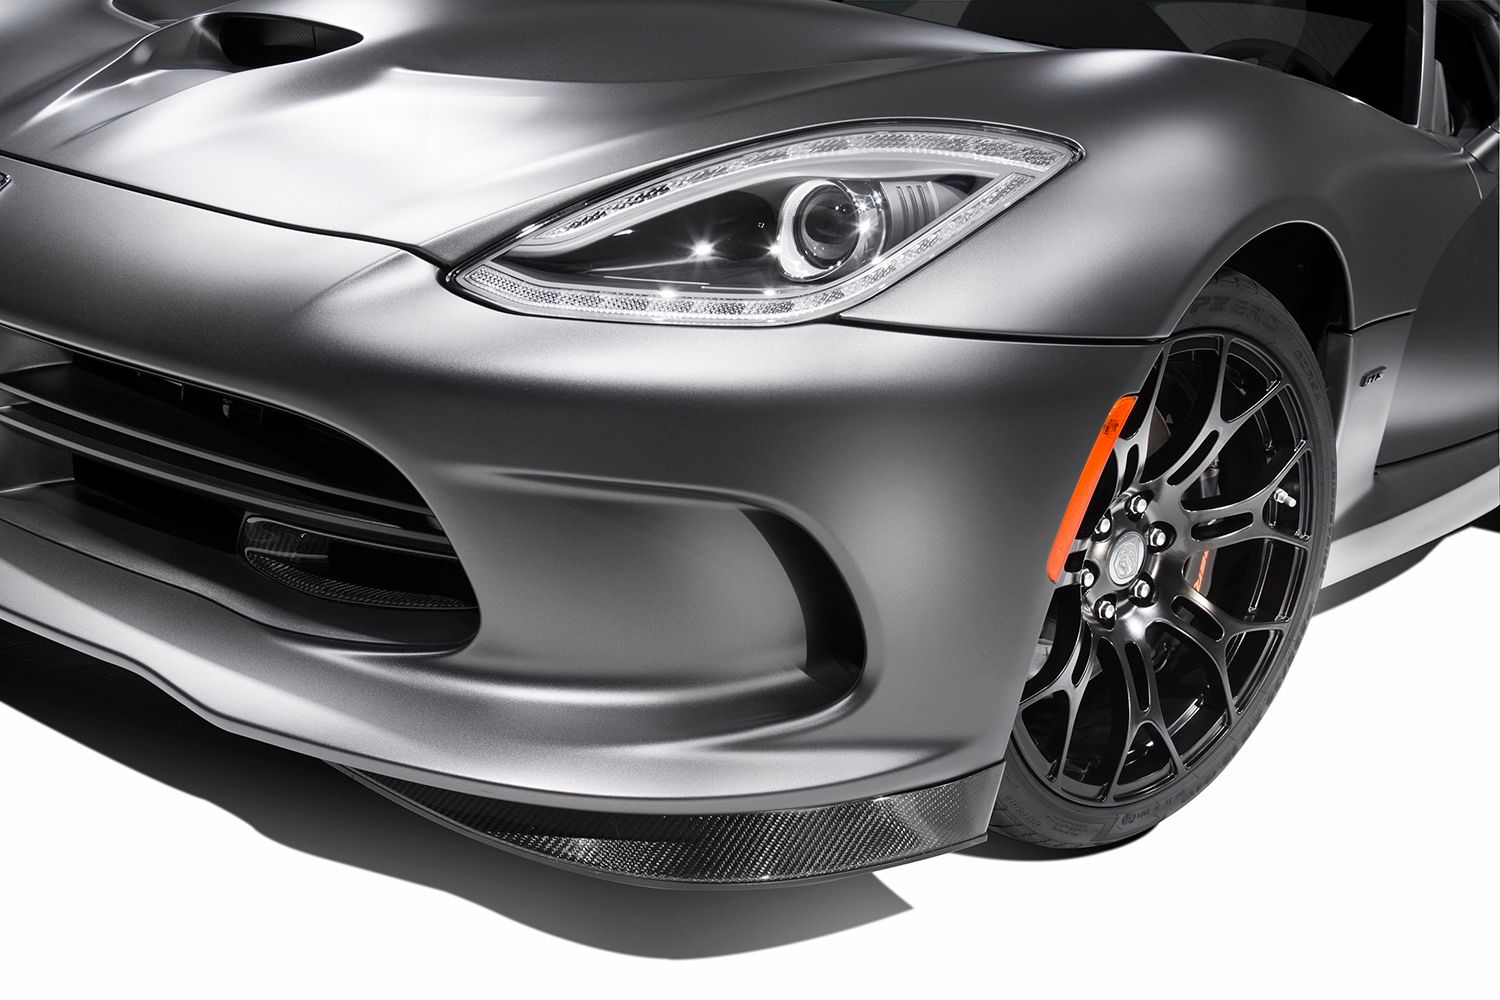 2014 SRT Viper Anodized Carbon Special Edition Time Attack